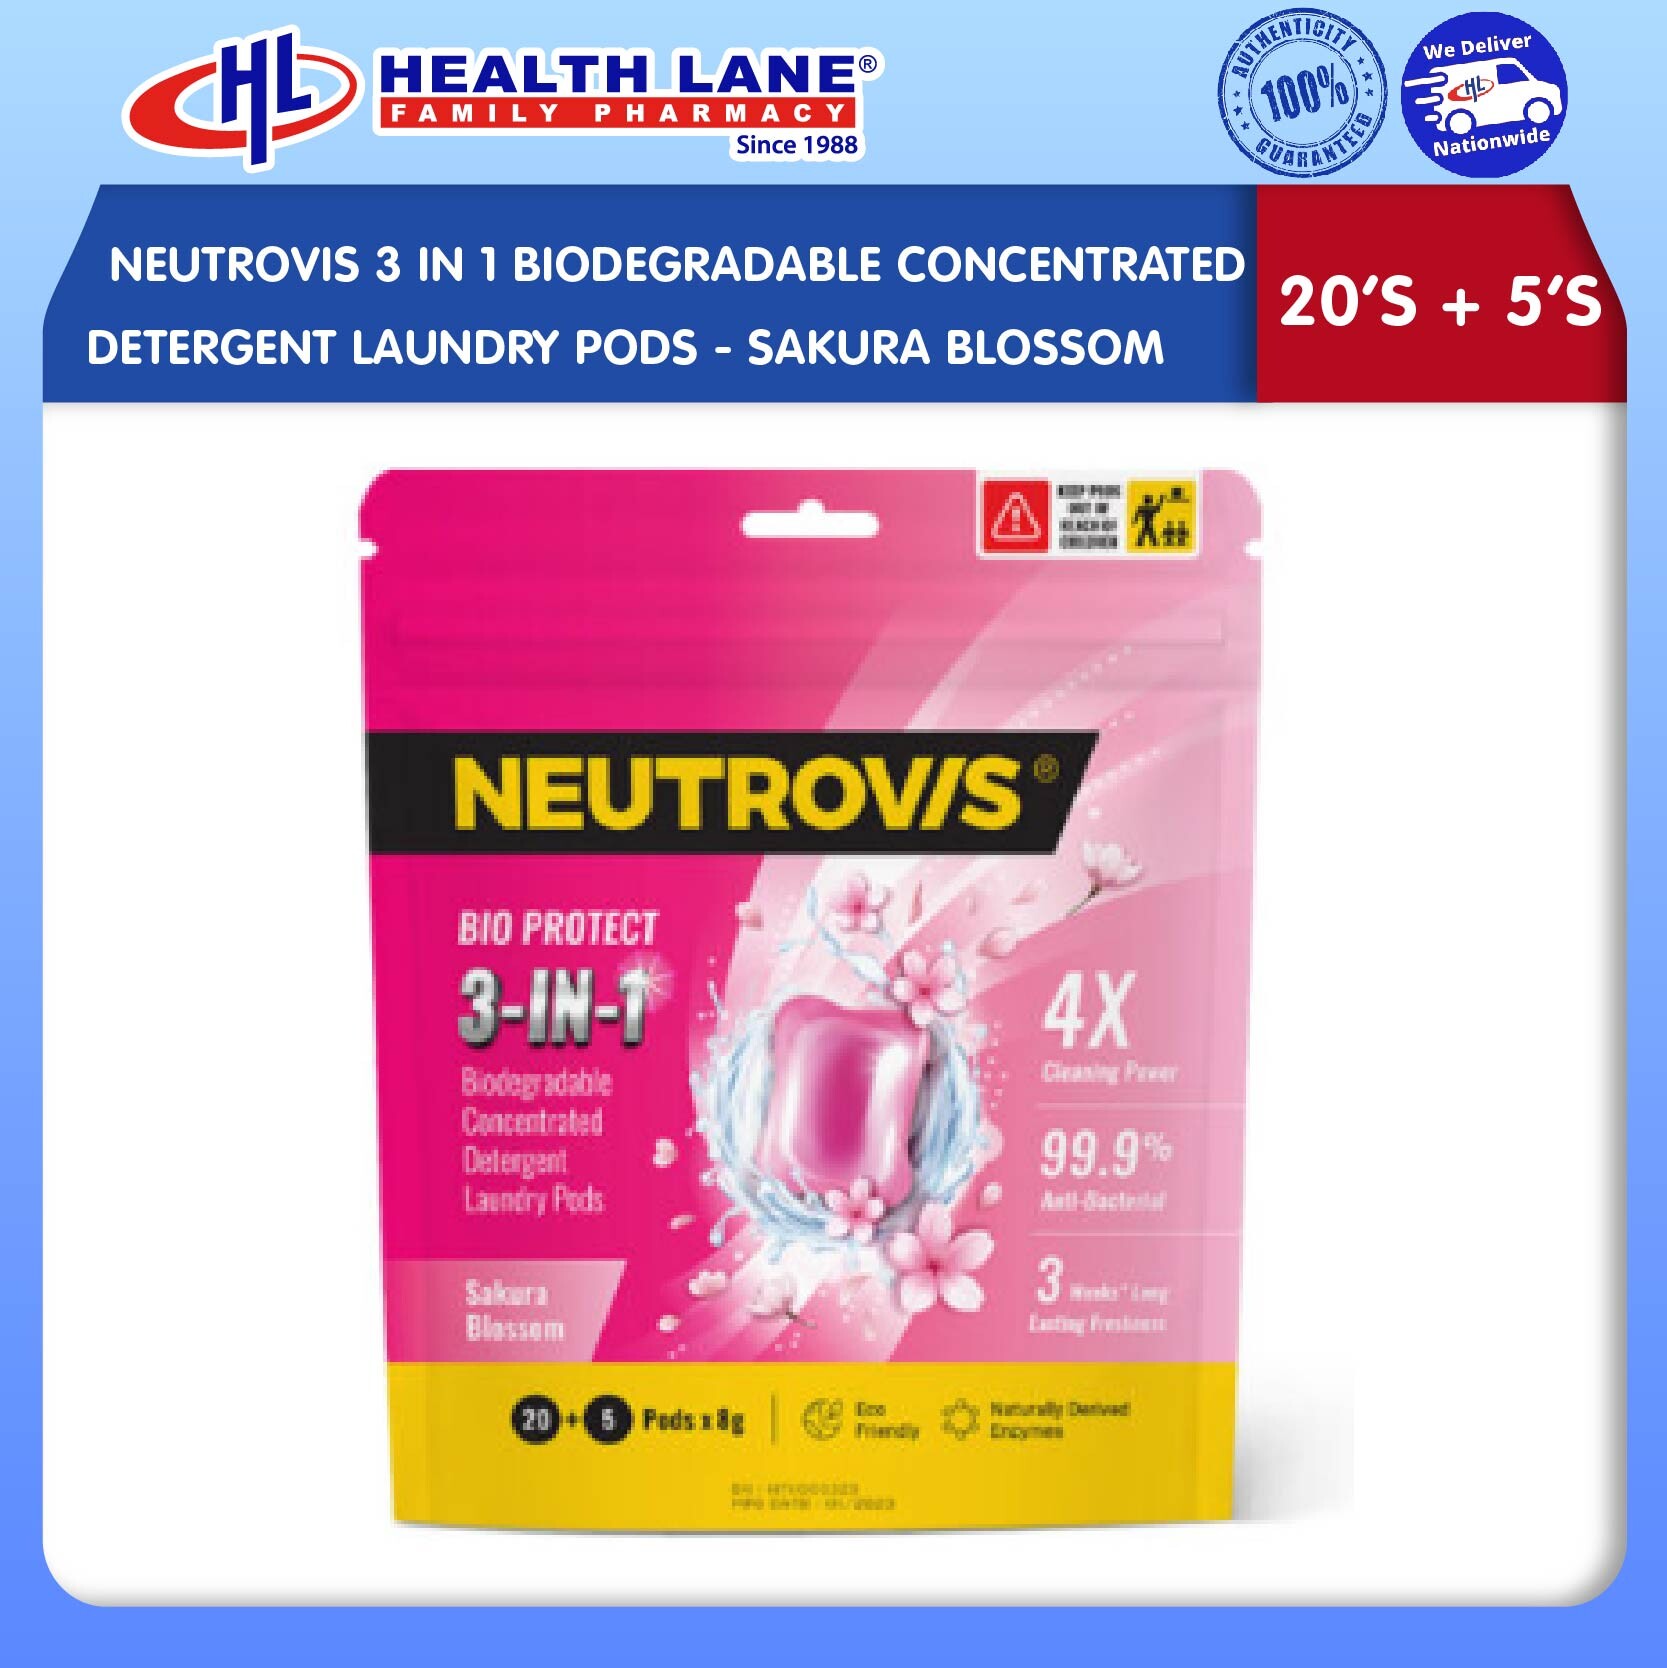 NEUTROVIS 3 IN 1 BIODEGRADABLE CONCENTRATED DETERGENT LAUNDRY PODS (20'S + 5'S) - SAKURA BLOSSOM